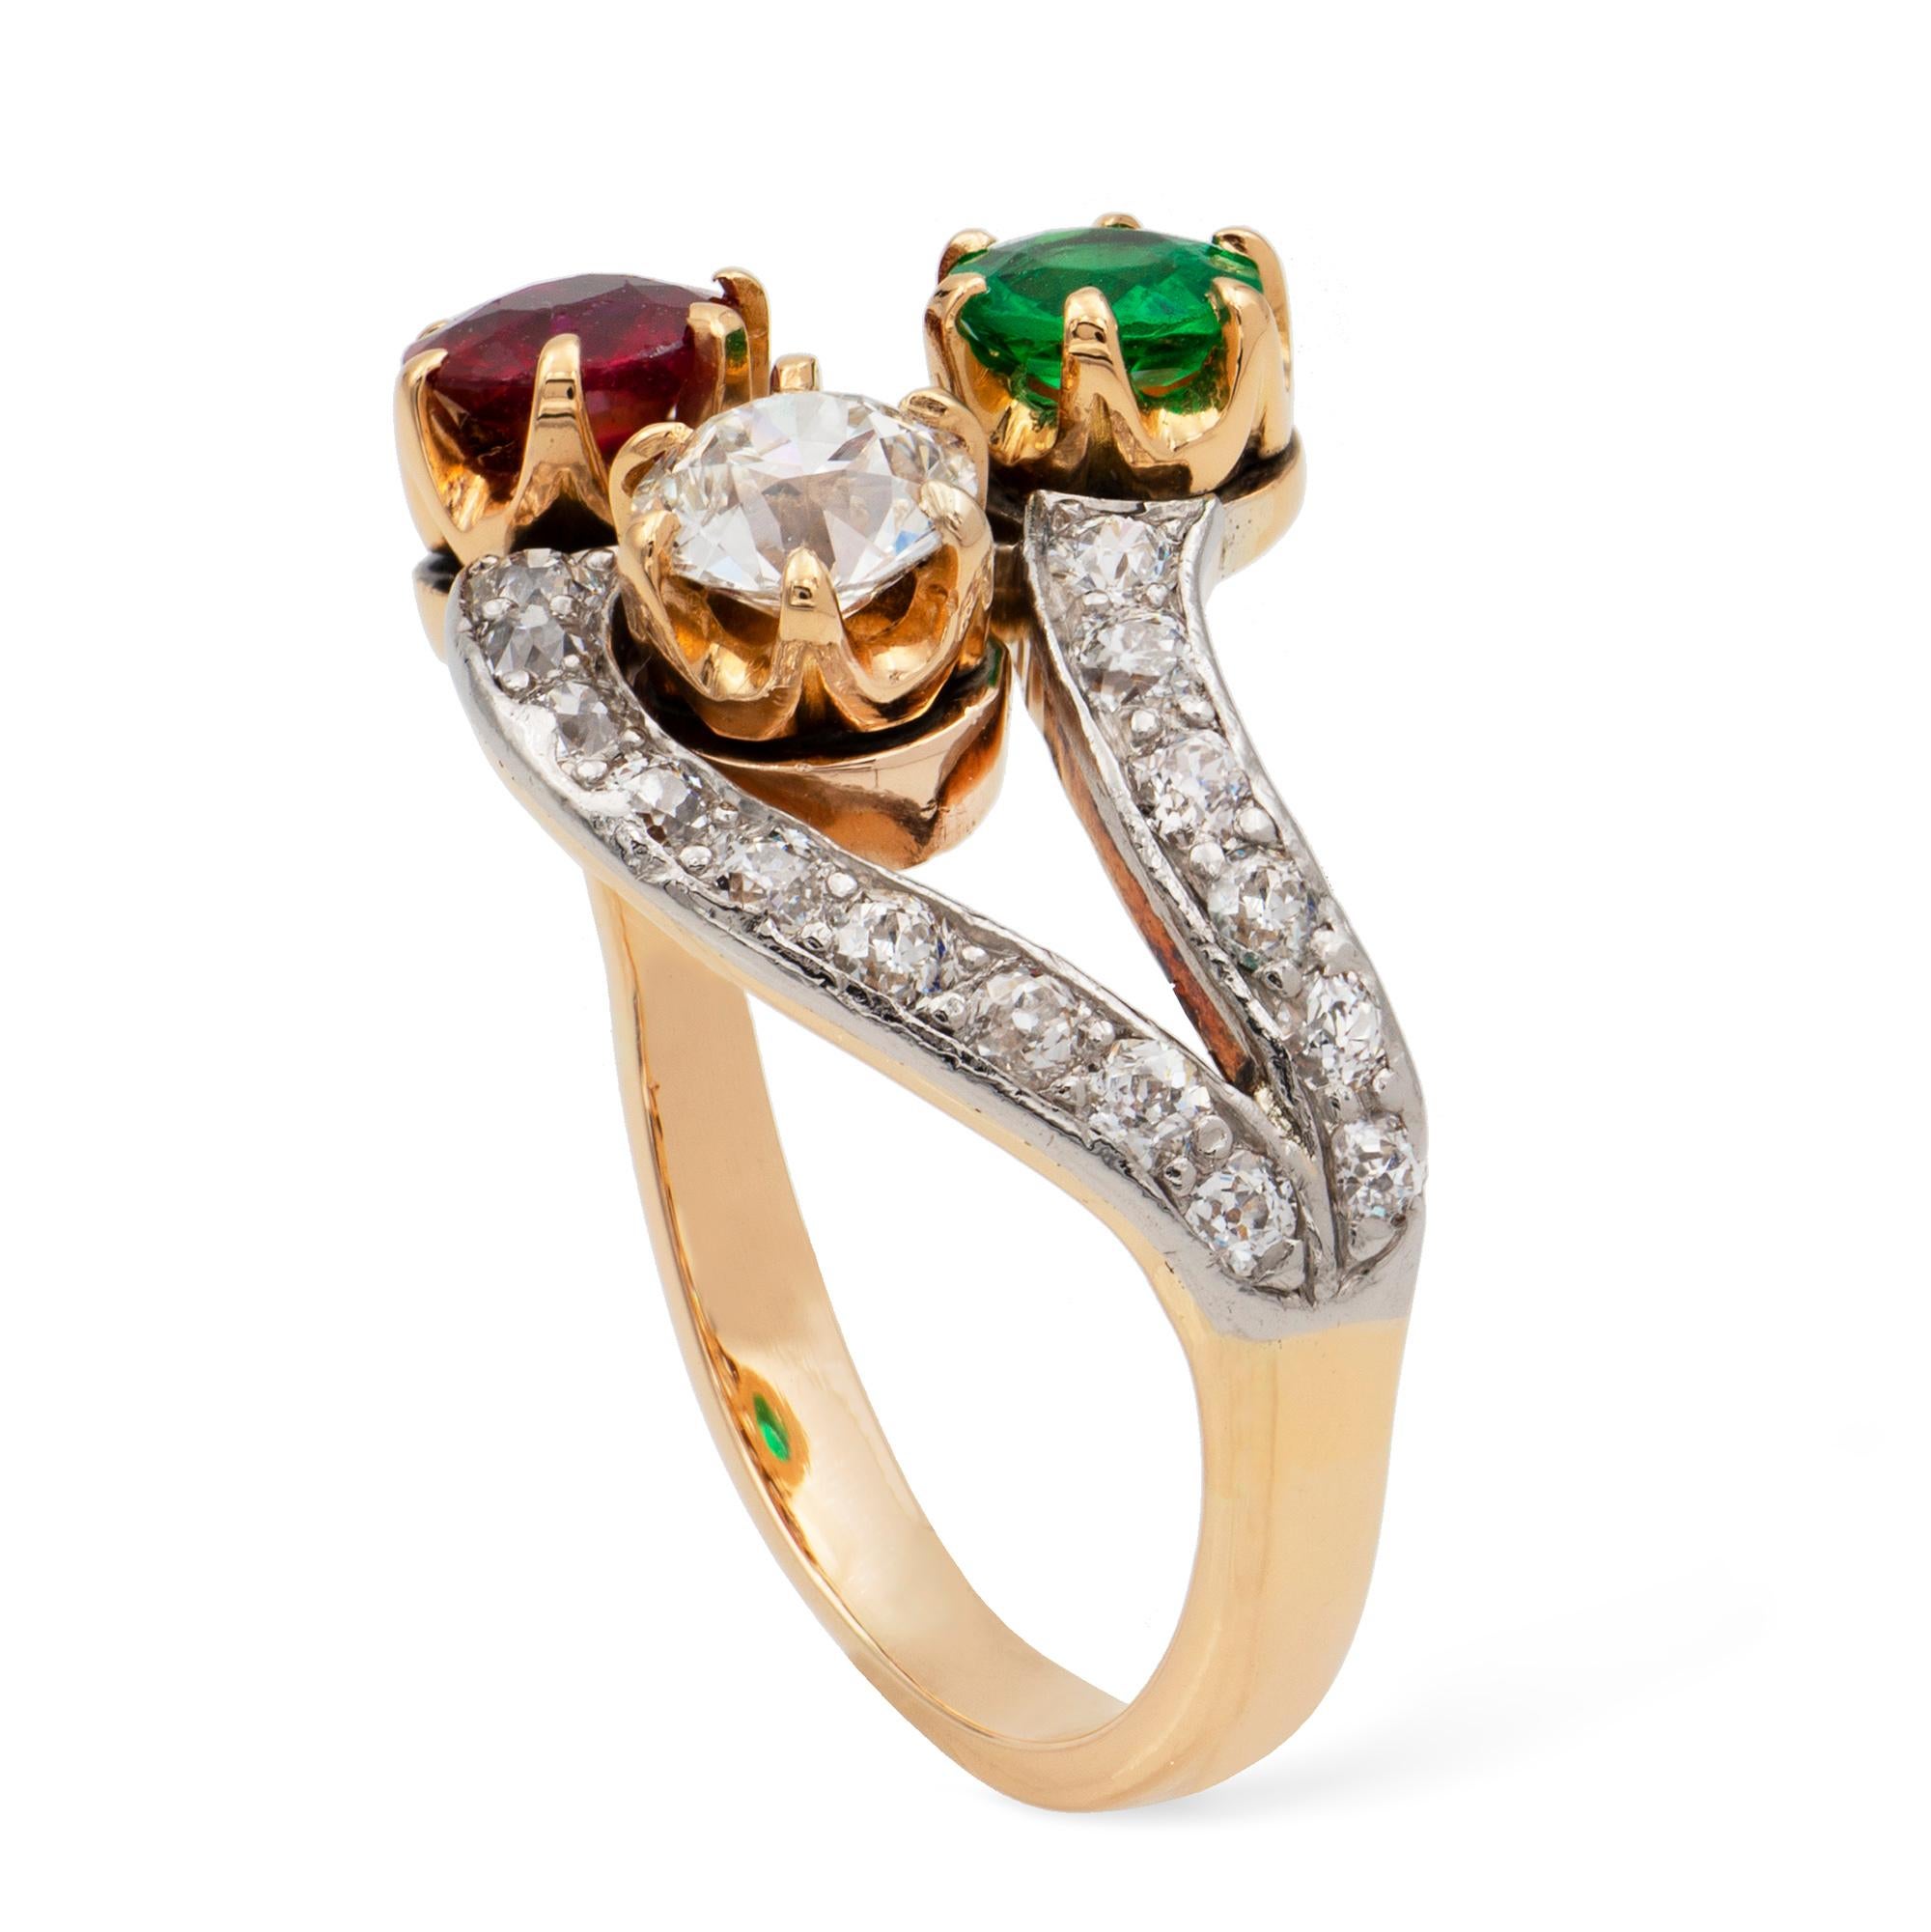 An early 20th century emerald, ruby and diamond triple cross-over ring, the round faceted emerald, weighing 0.25 carats, the round faceted ruby, weighing 0.44 carats and the old European-cut diamond, weighing 0.45 carats, claw set to silver mount